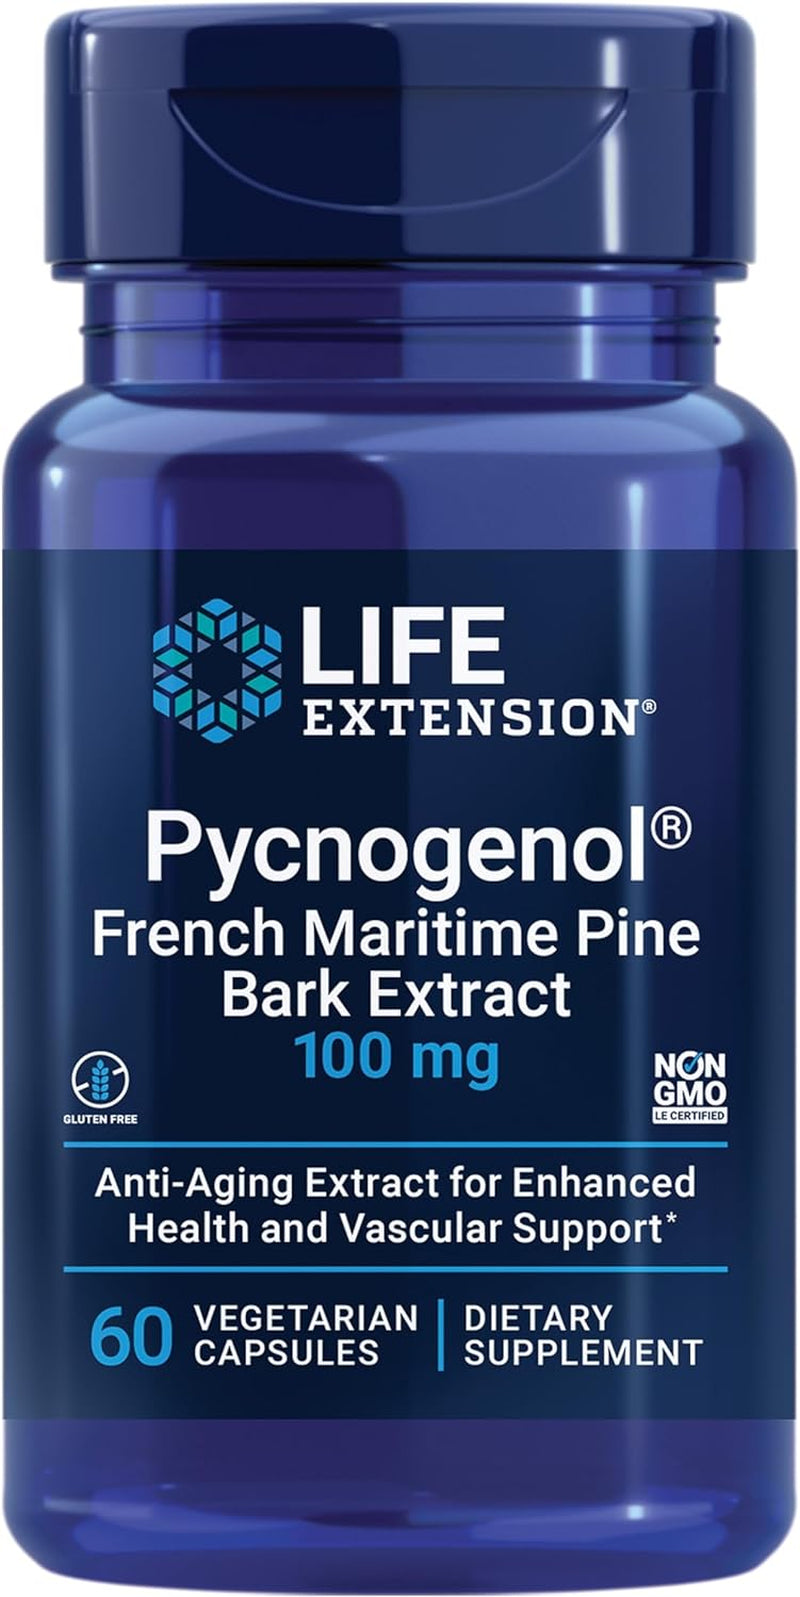 Life Extension Pycnogenol – French Maritime Pine Bark Extract – Scientifically Studied Healthy Aging & Vascular Health Supplement – Non-Gmo, Gluten-Free, Vegetarian – 60 Capsules